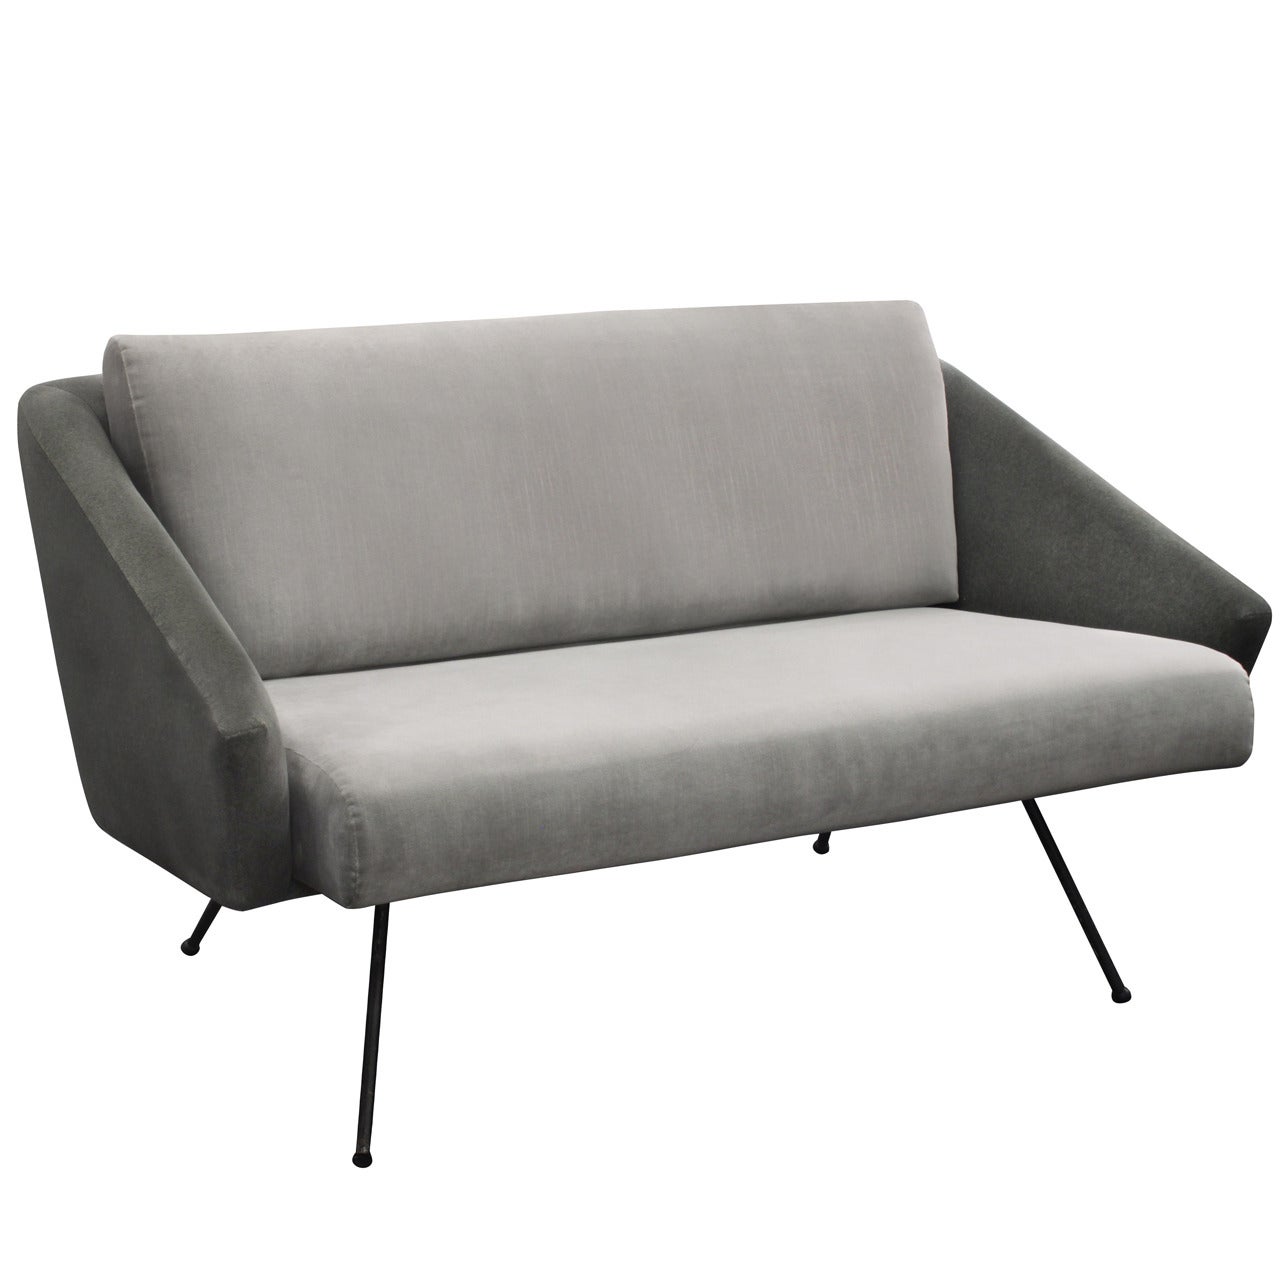 Small Sculptural Sofa with Splayed Legs